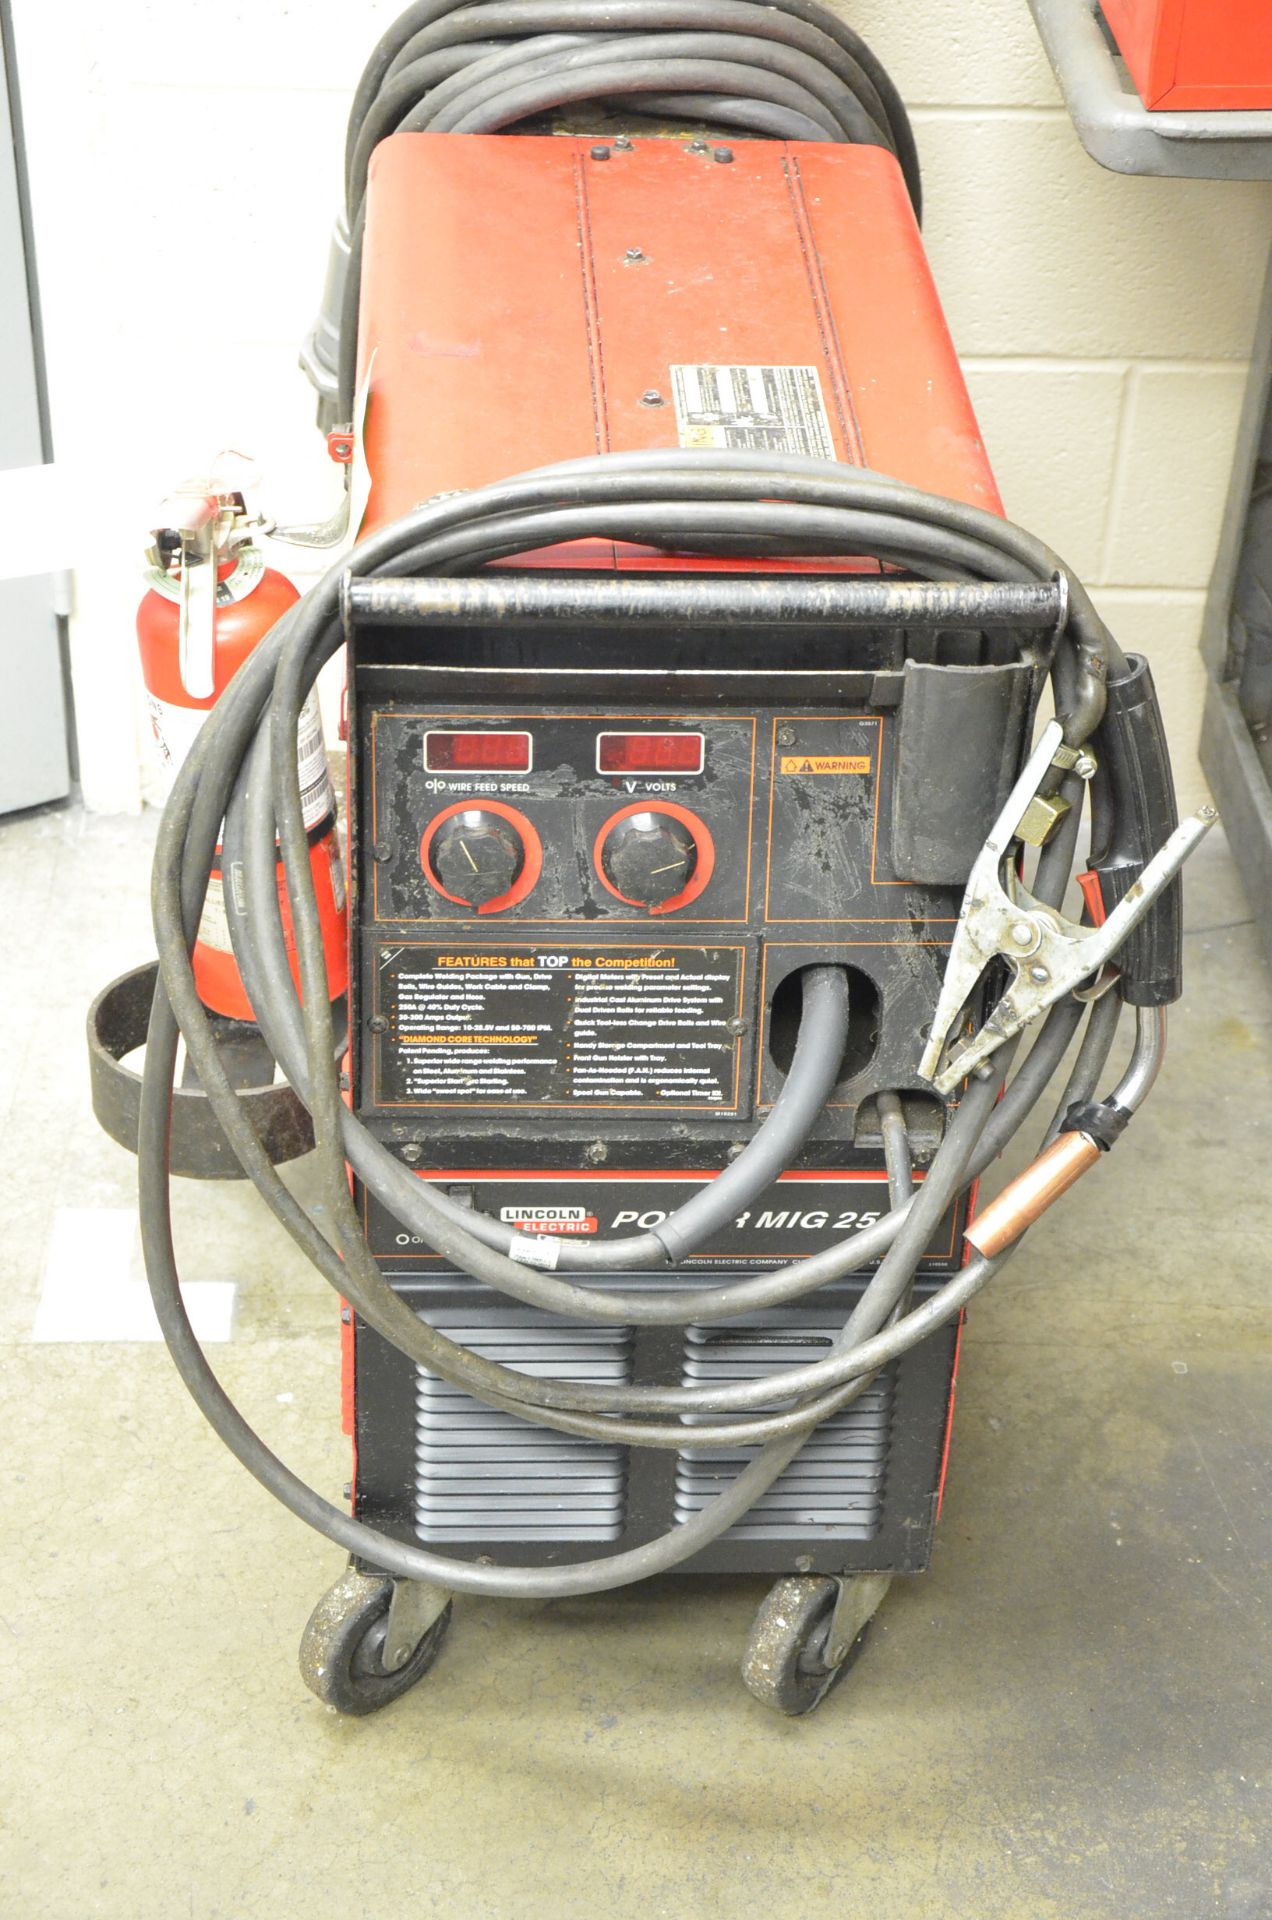 LINCOLN ELECTRIC POWERMIG 255 DIGITAL PORTABLE MIG WELDER WITH CABLES AND GUN, (ARGON TANK NOT - Image 2 of 2